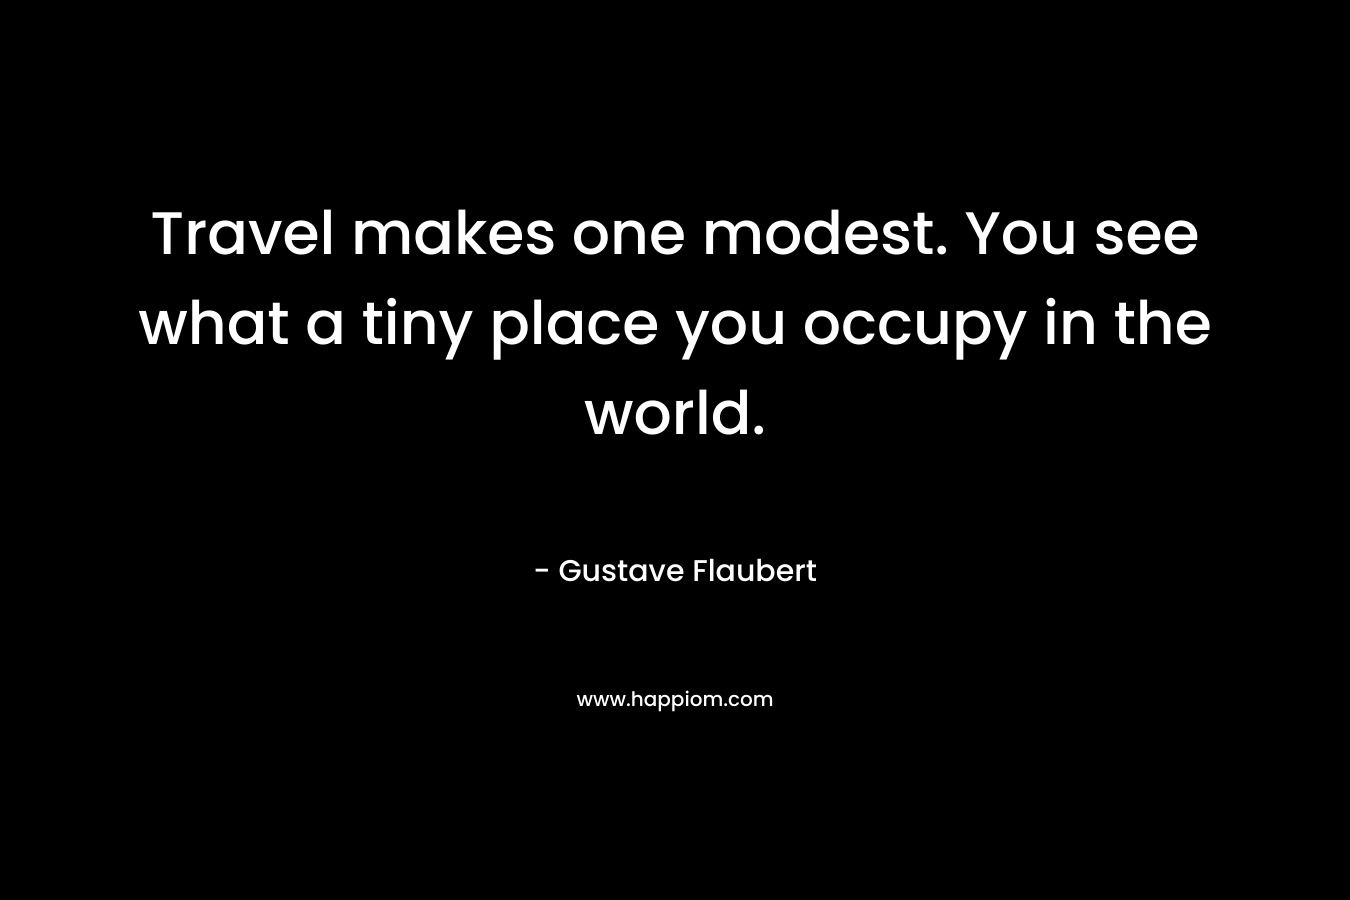 Travel makes one modest. You see what a tiny place you occupy in the world.